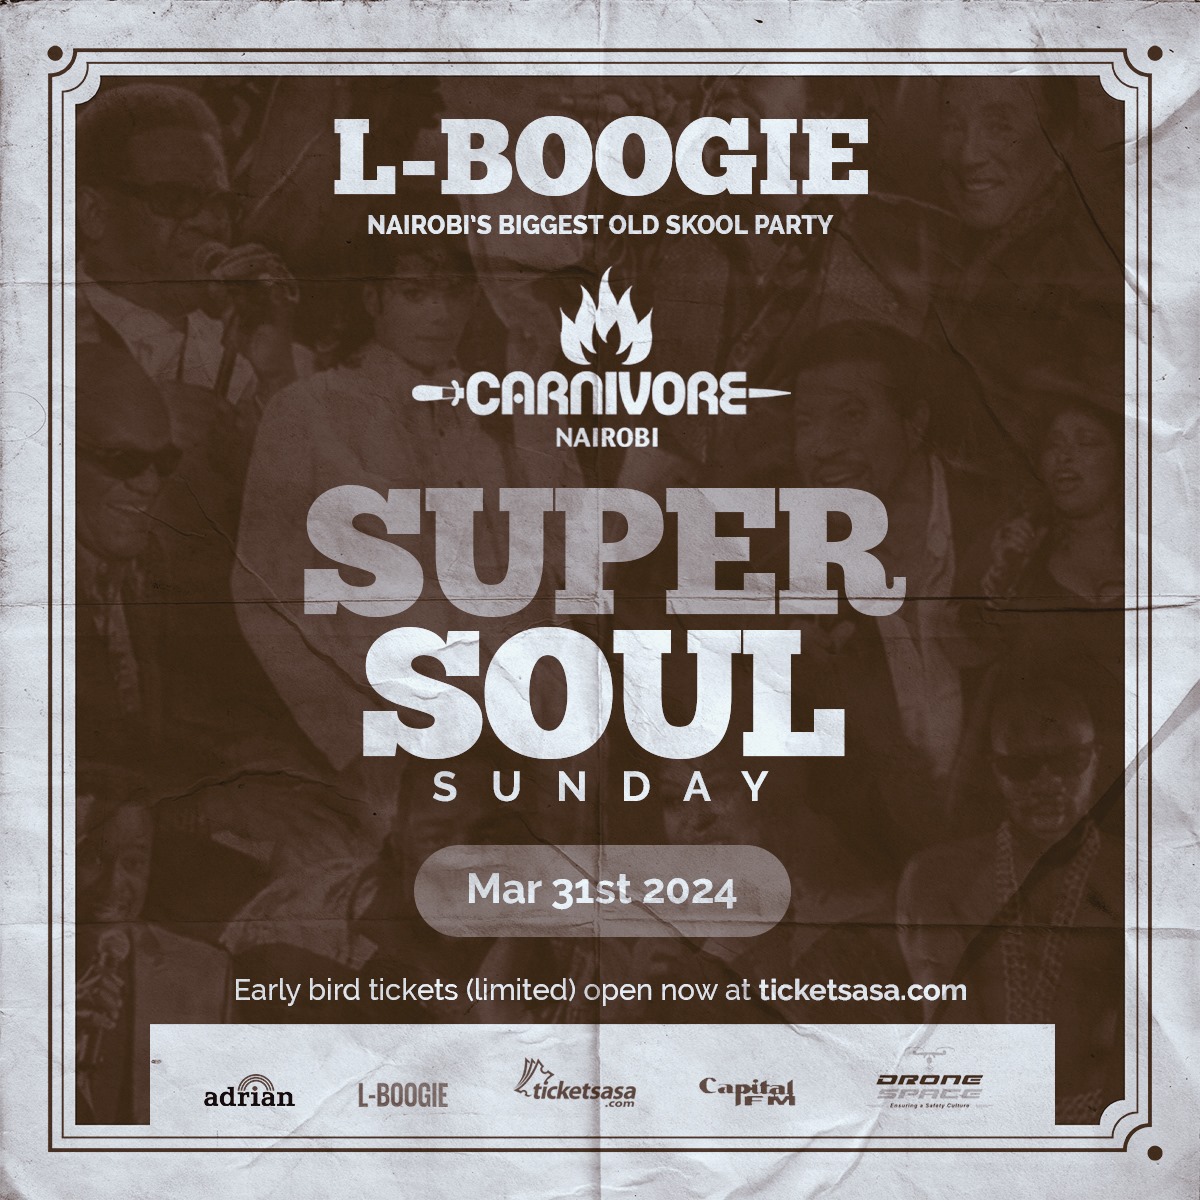 L-BOOGIE SUPER SOUL Is Coming!!! Nairobi's Biggest Old Skool Party. March 31st 2024. @CarnivoreKe Early Bird (limited) Tickets open Now: ticketsasa.com/events/eventde…